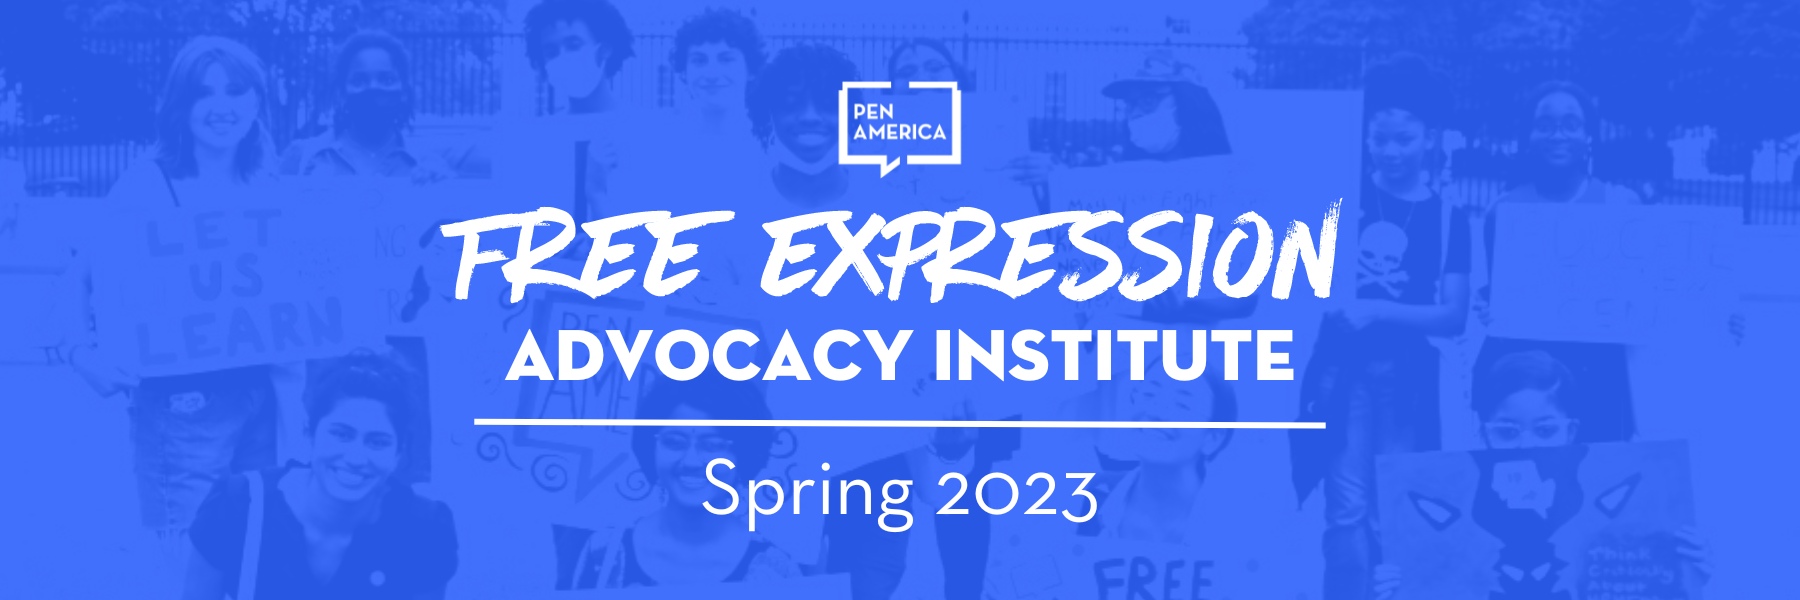 Spring 2023 Free Expression Advocacy Institute Lockup